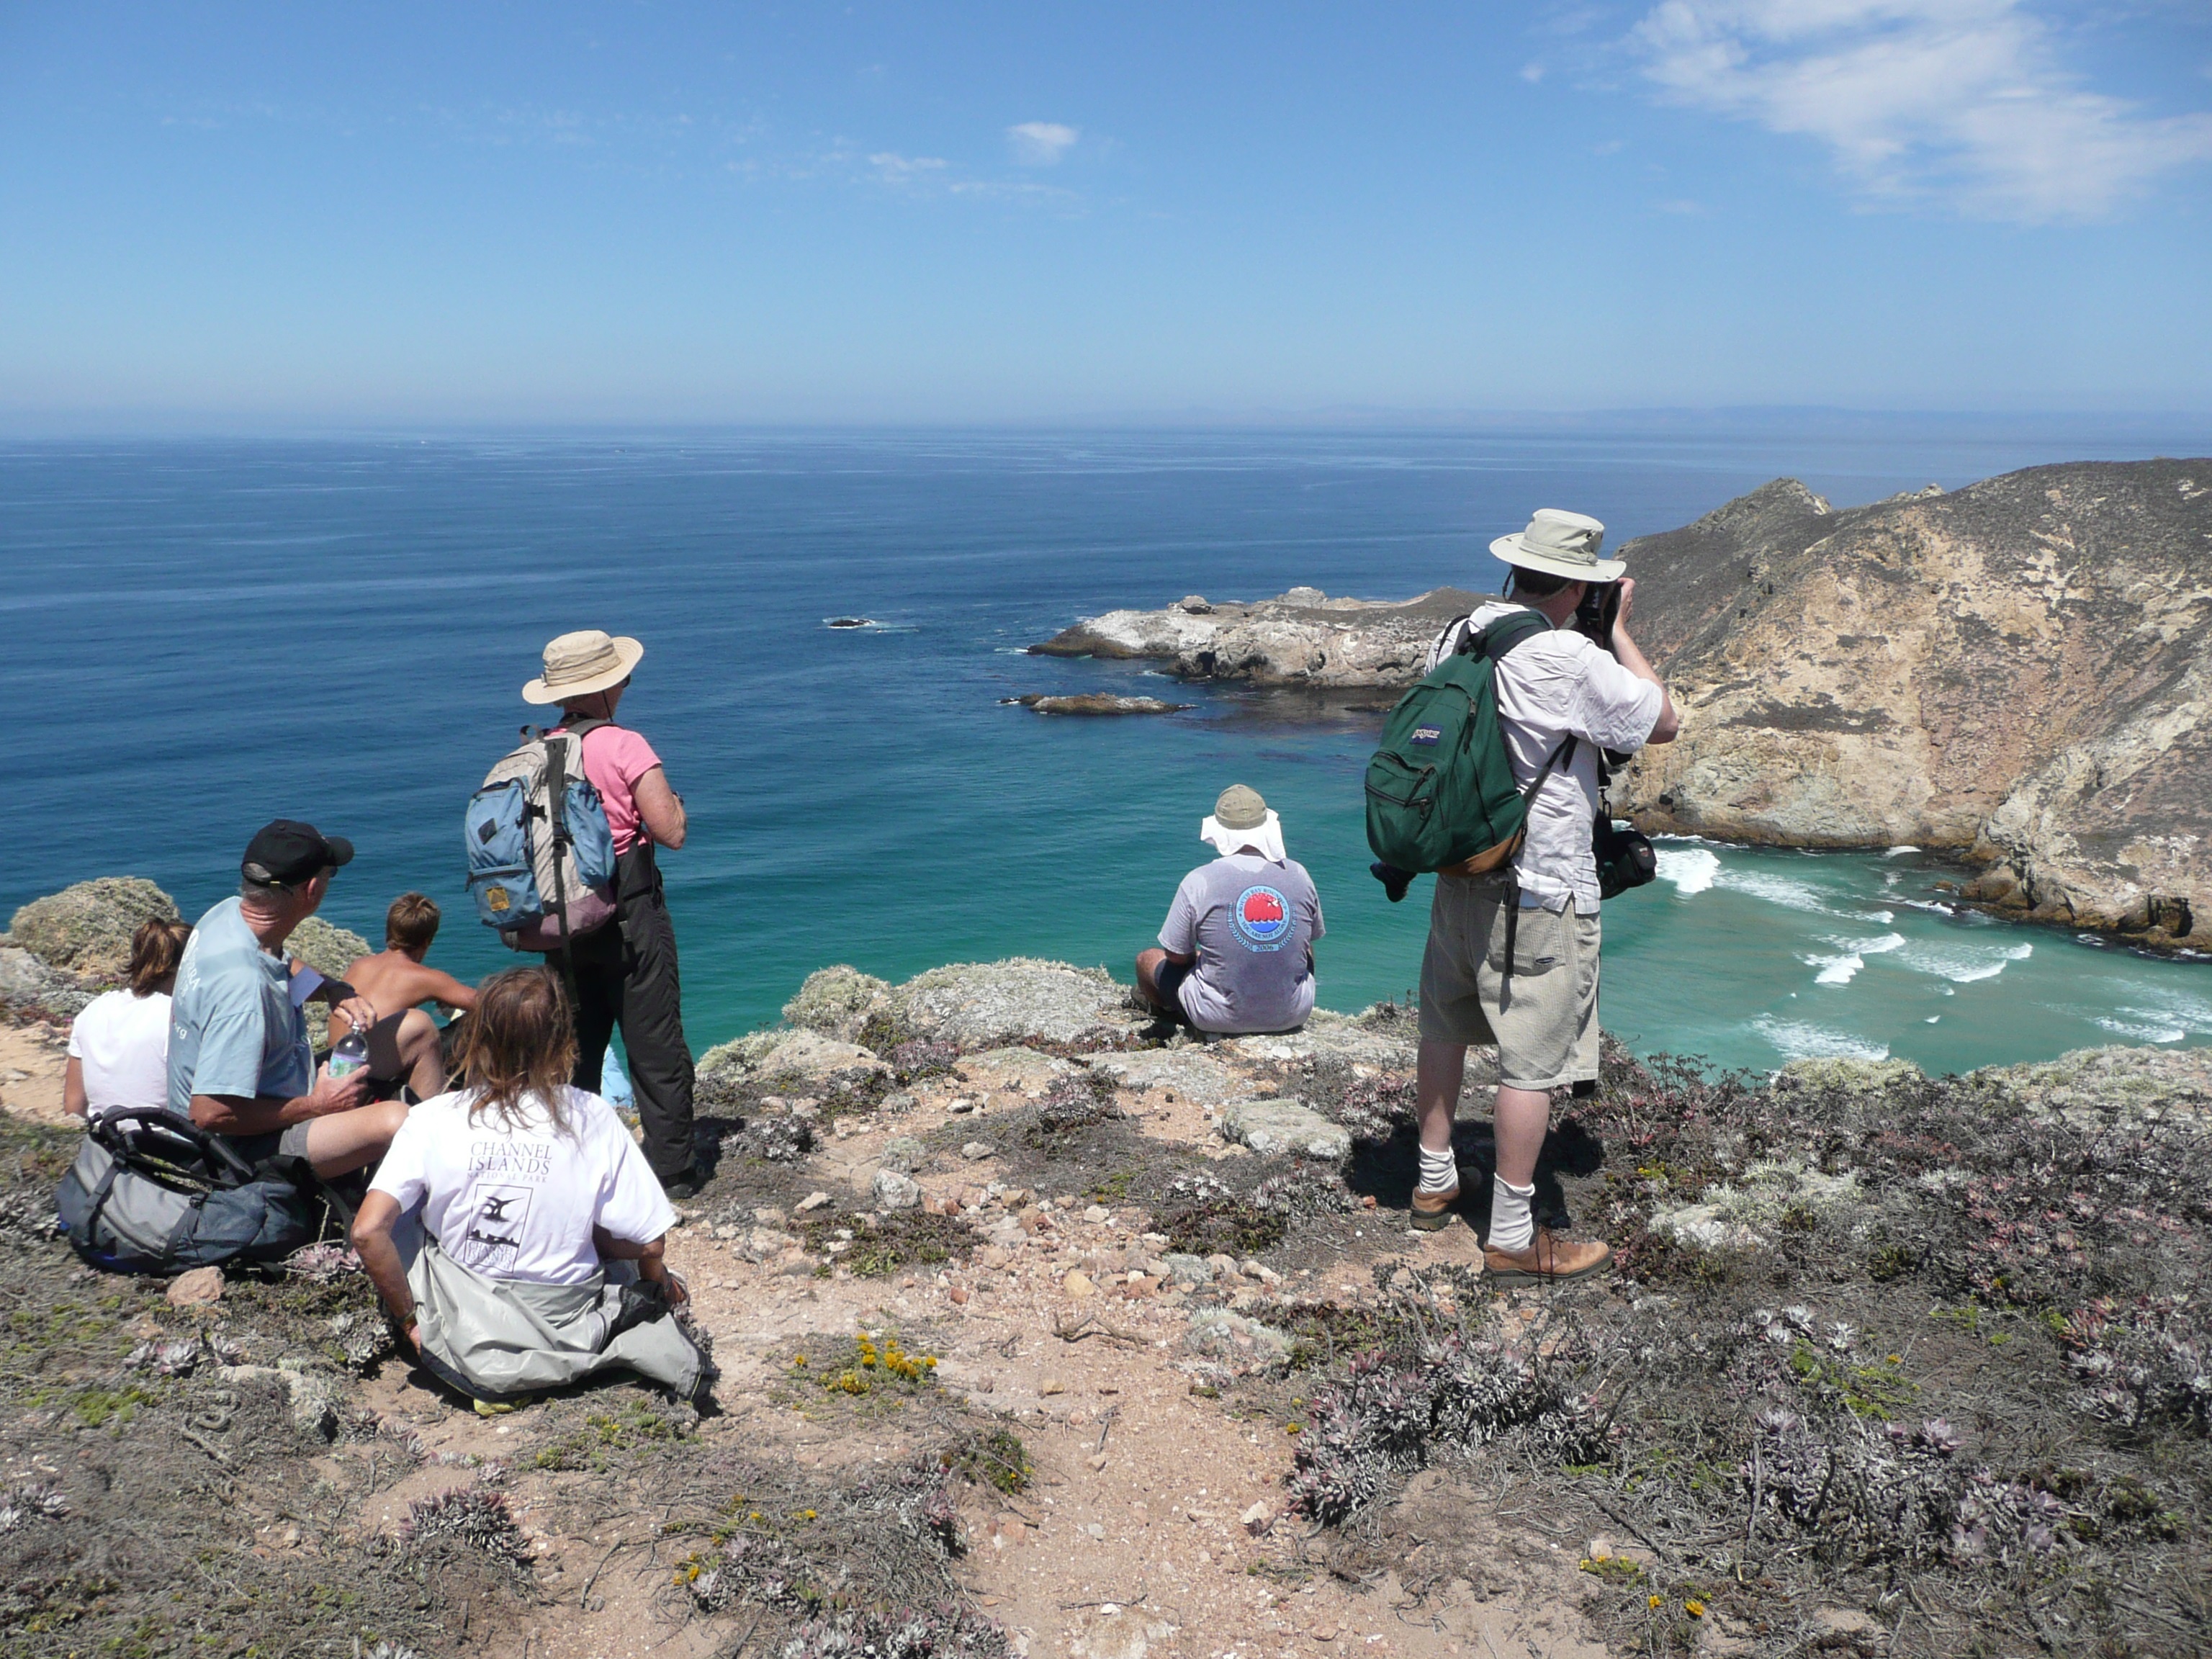 Hikers resting at overlook of island and blue ocean on a sunny day